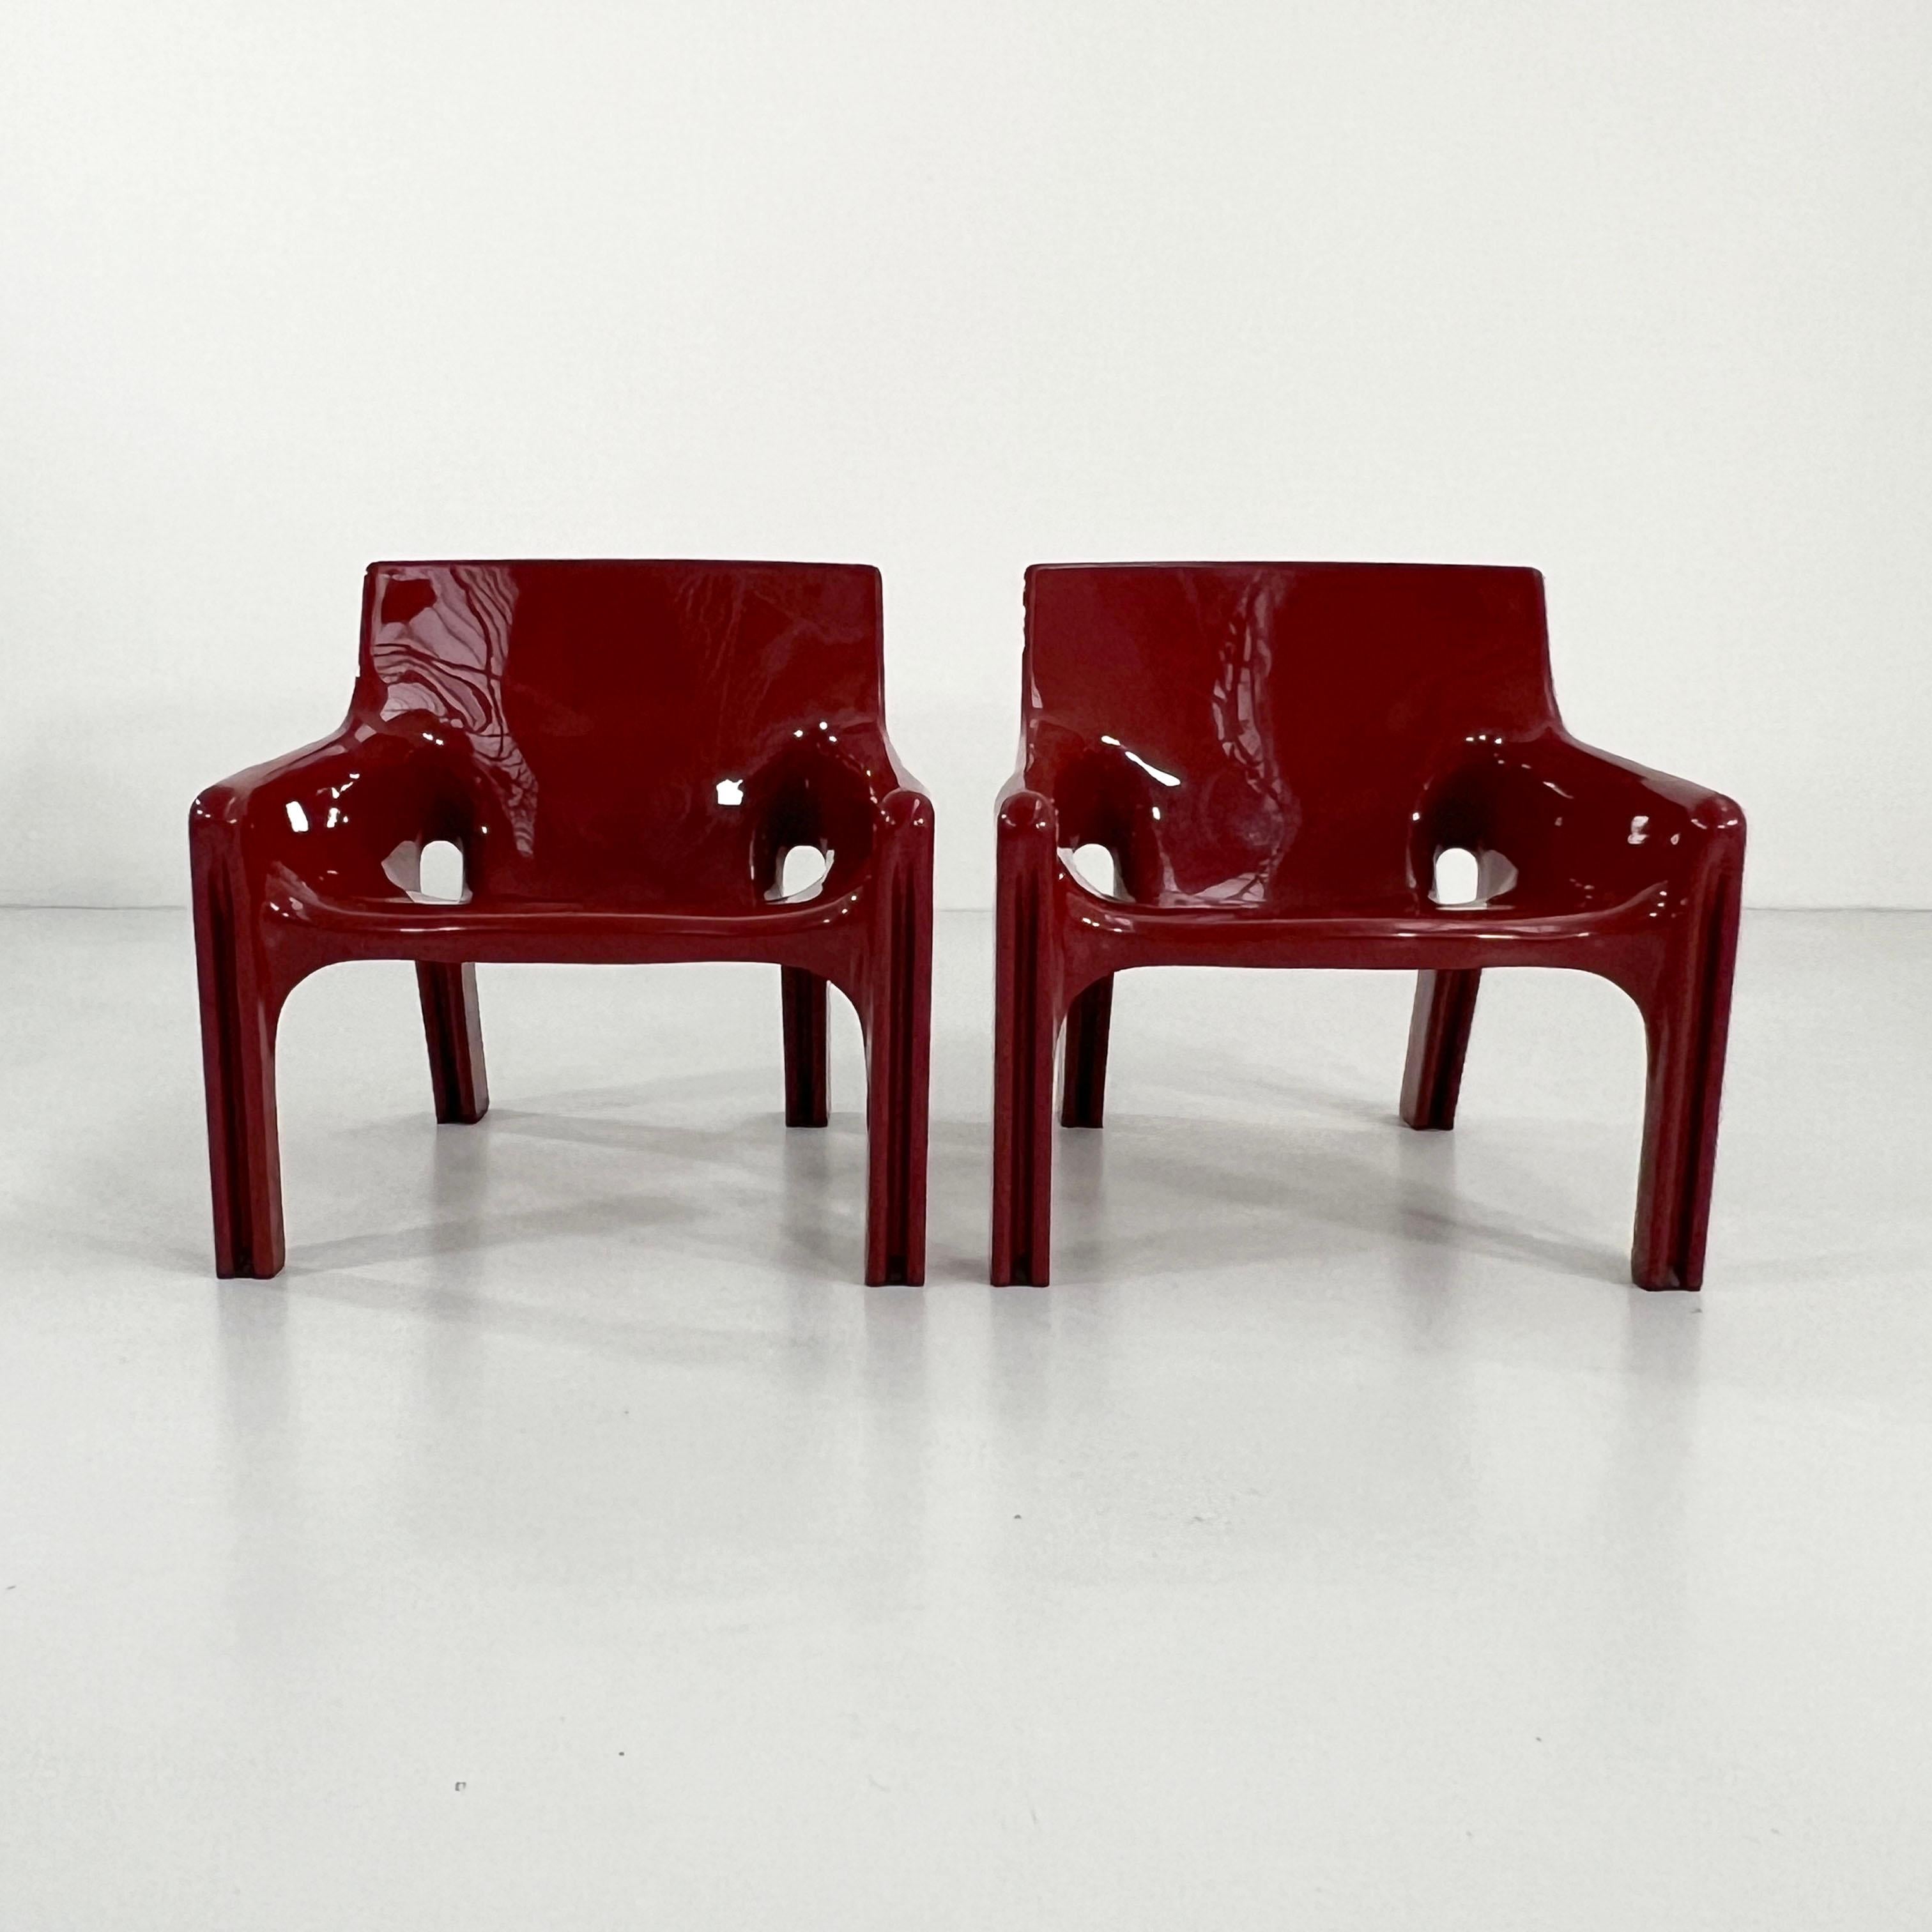 Mid-Century Modern Pair of Burgundy Vicario Lounge Chair by Vico Magistretti for Artemide, 1970s